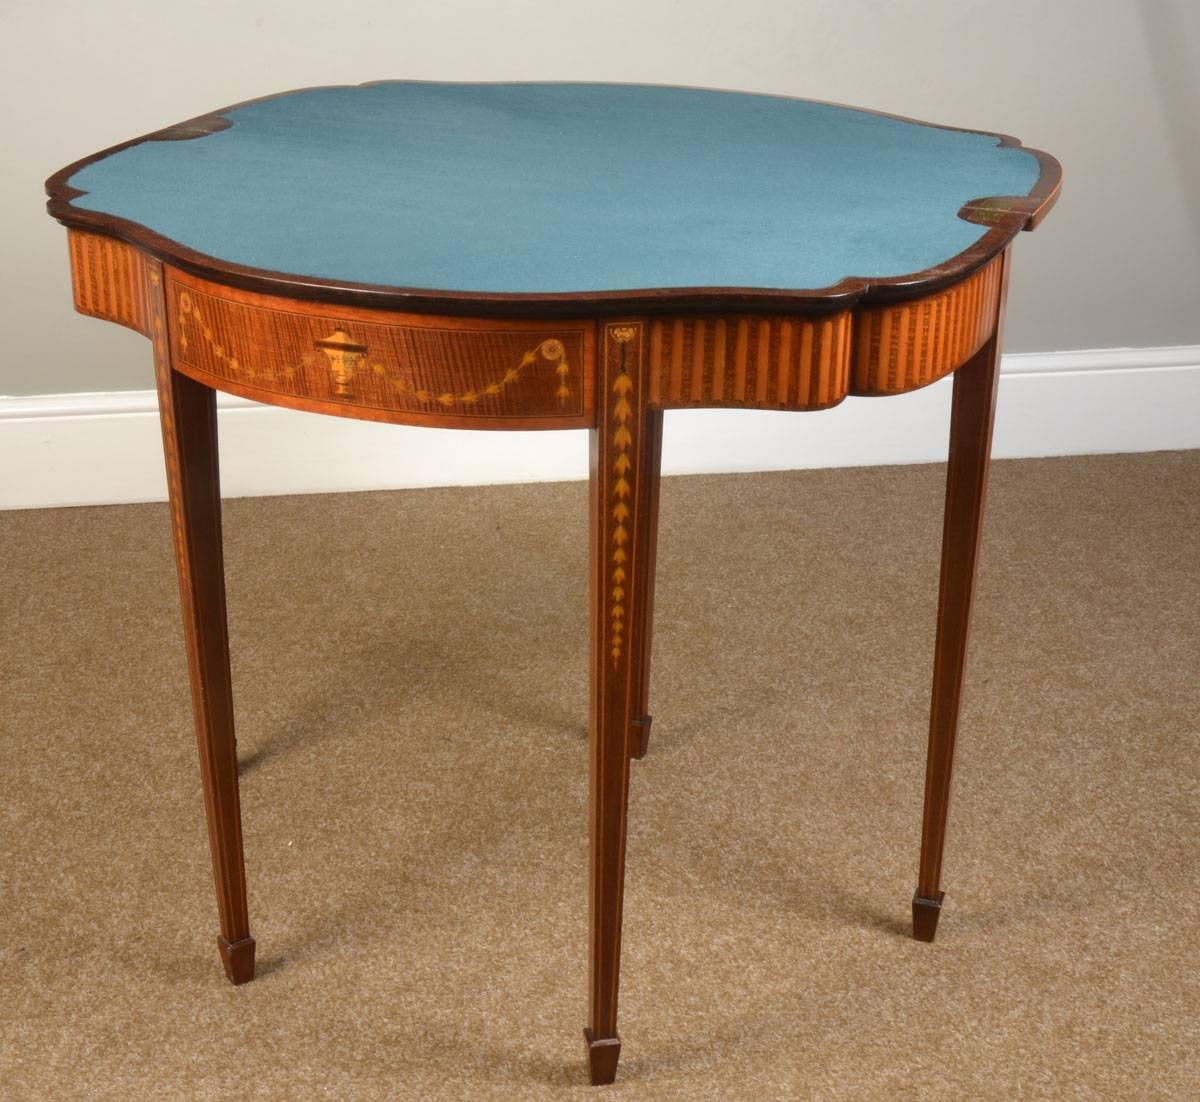 

Mahogany and marquetry serpentine card table in the Sheraton manner the satinwood-banded top inlaid with a fan medallion and radiating husk chains, the frieze with simulated fluting on urn and husk chains and on tapering square legs with spade